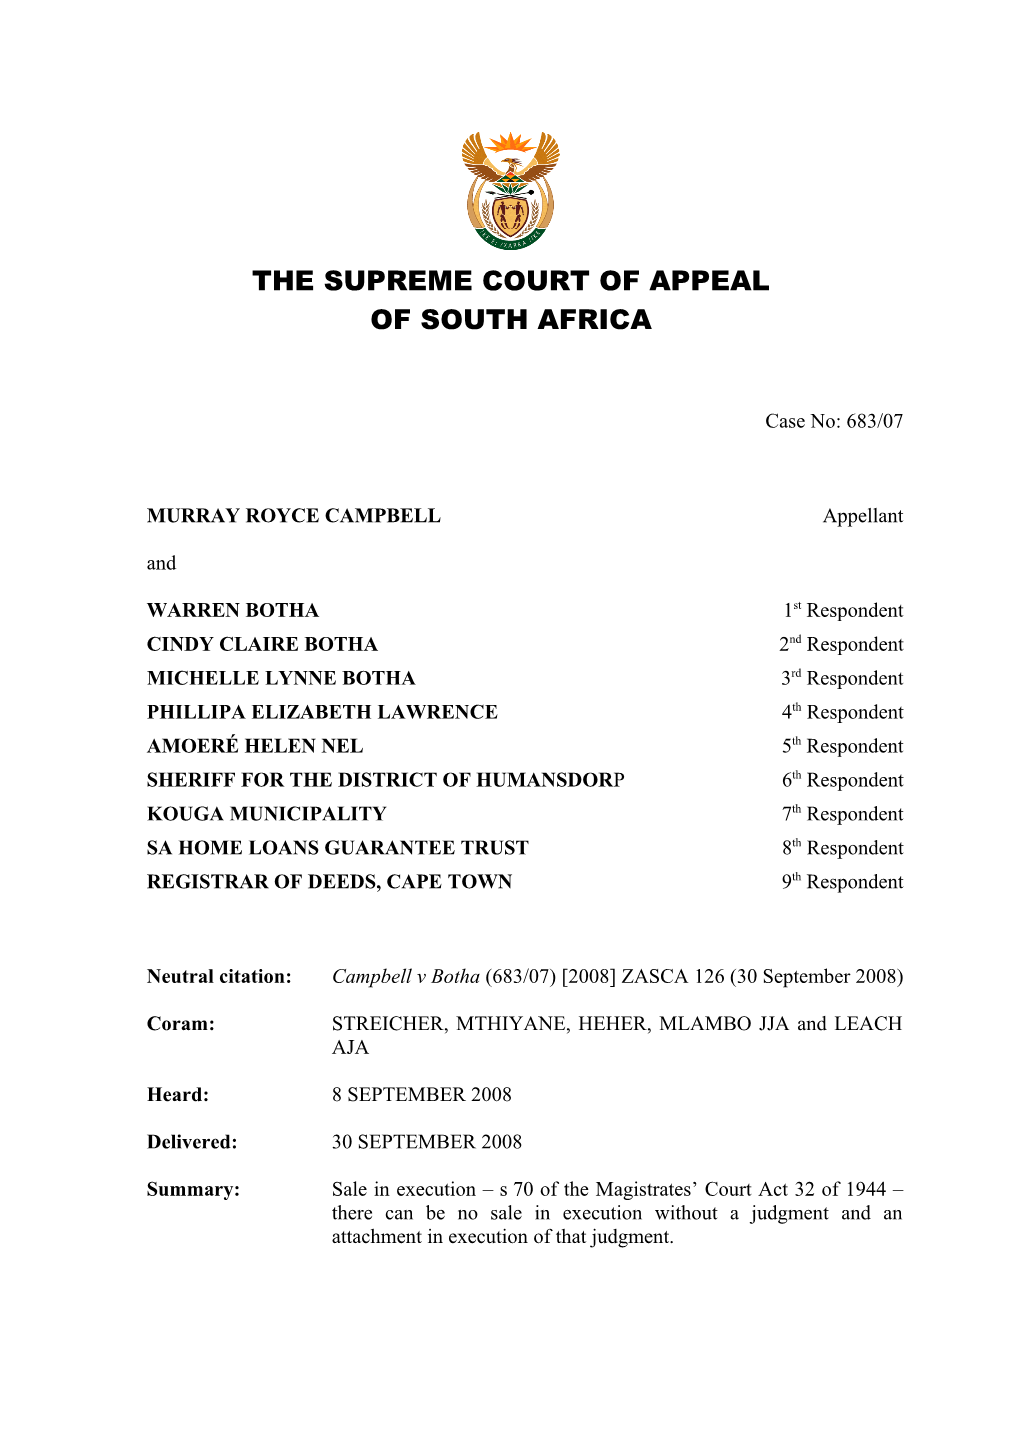 The Supreme Court of Appeal s1